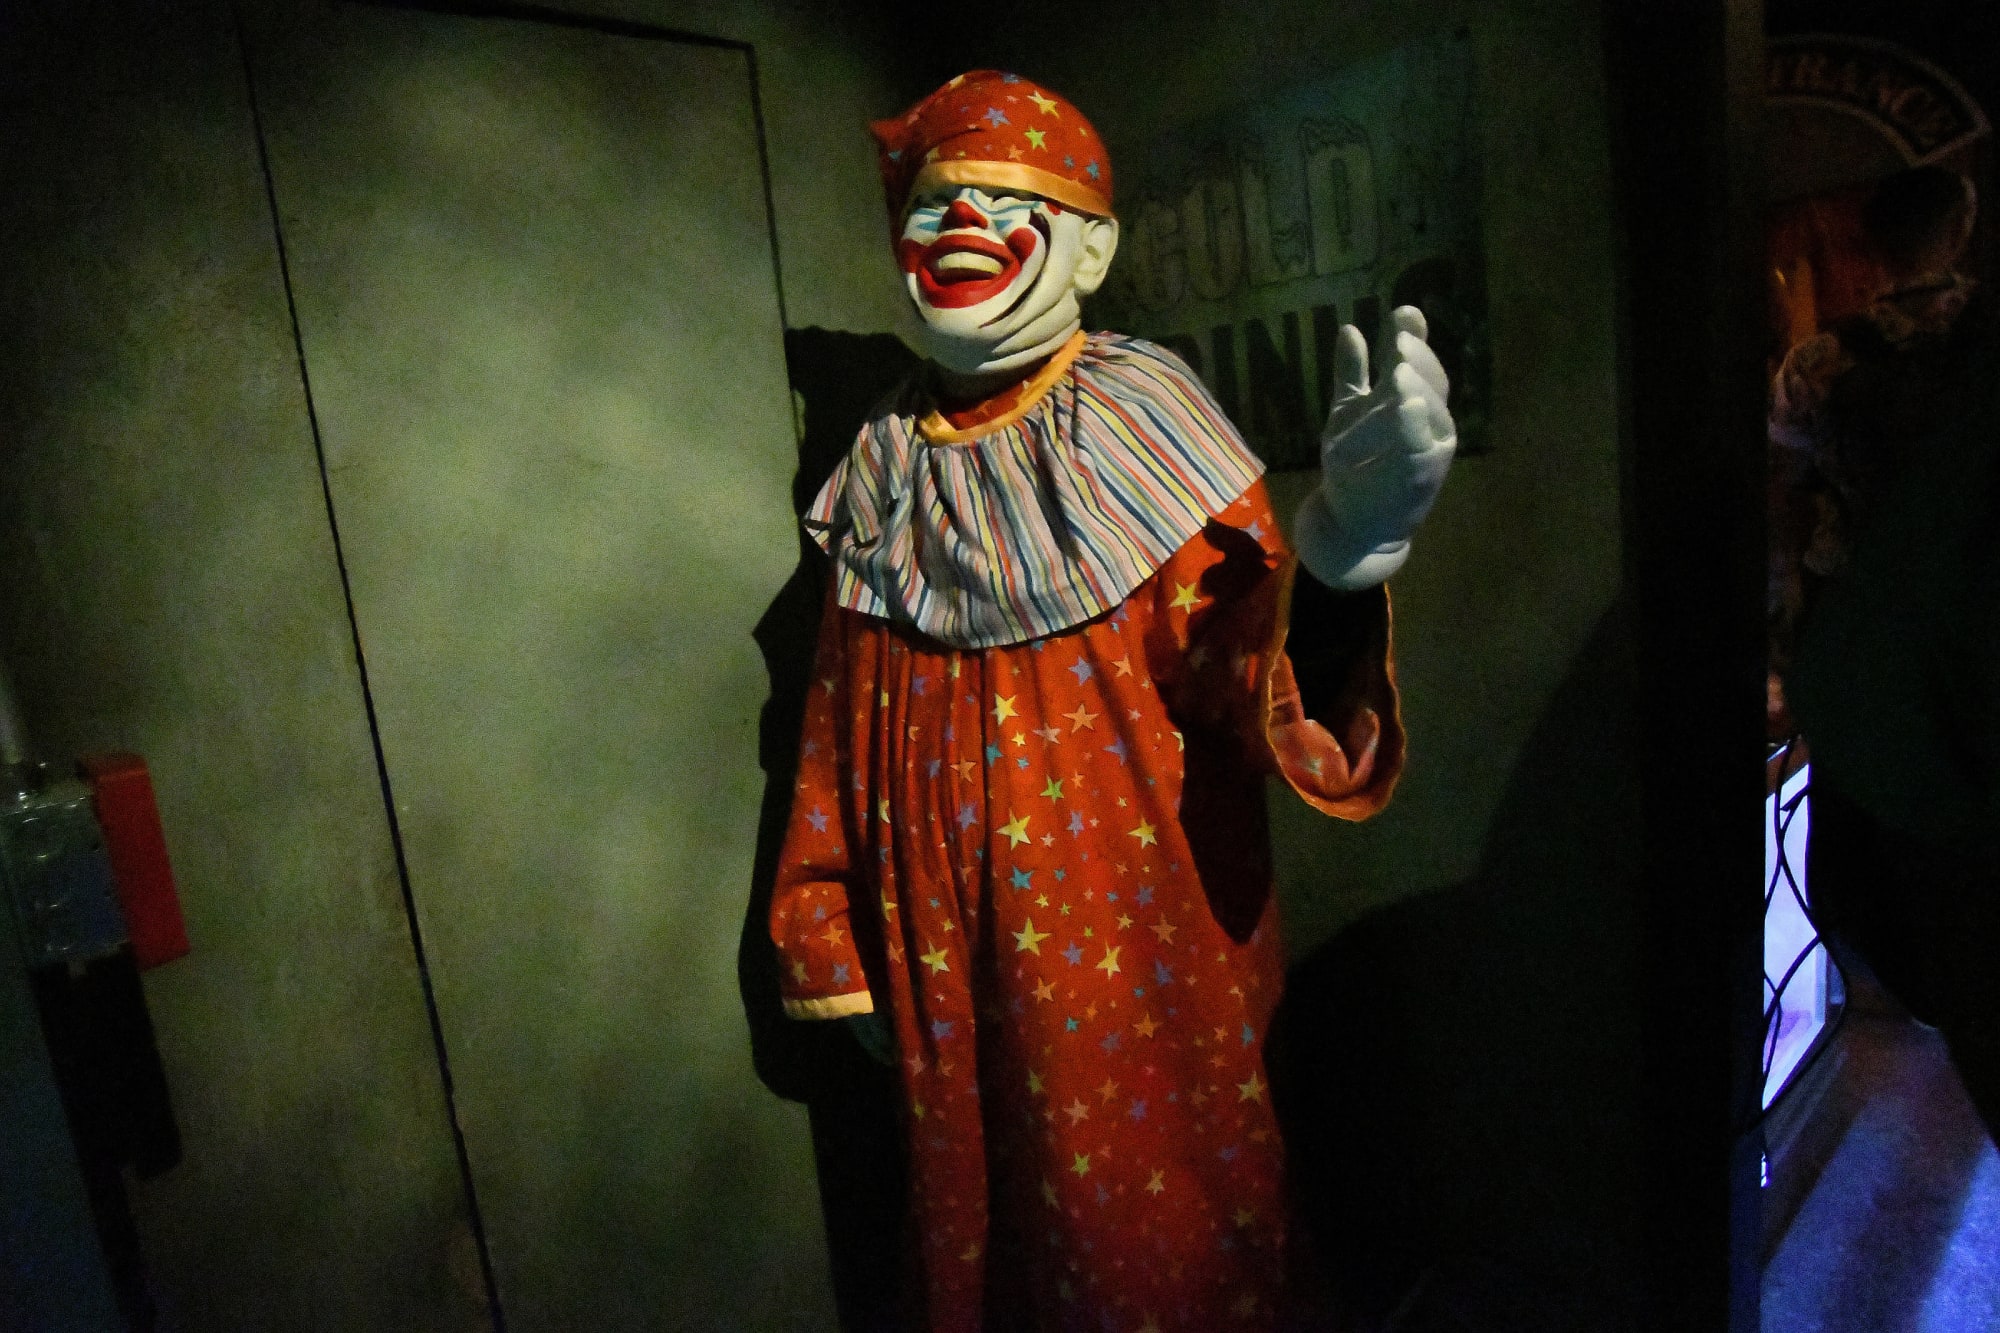 Halloween Horror Nights at Universal Studios on sale now with new mazes